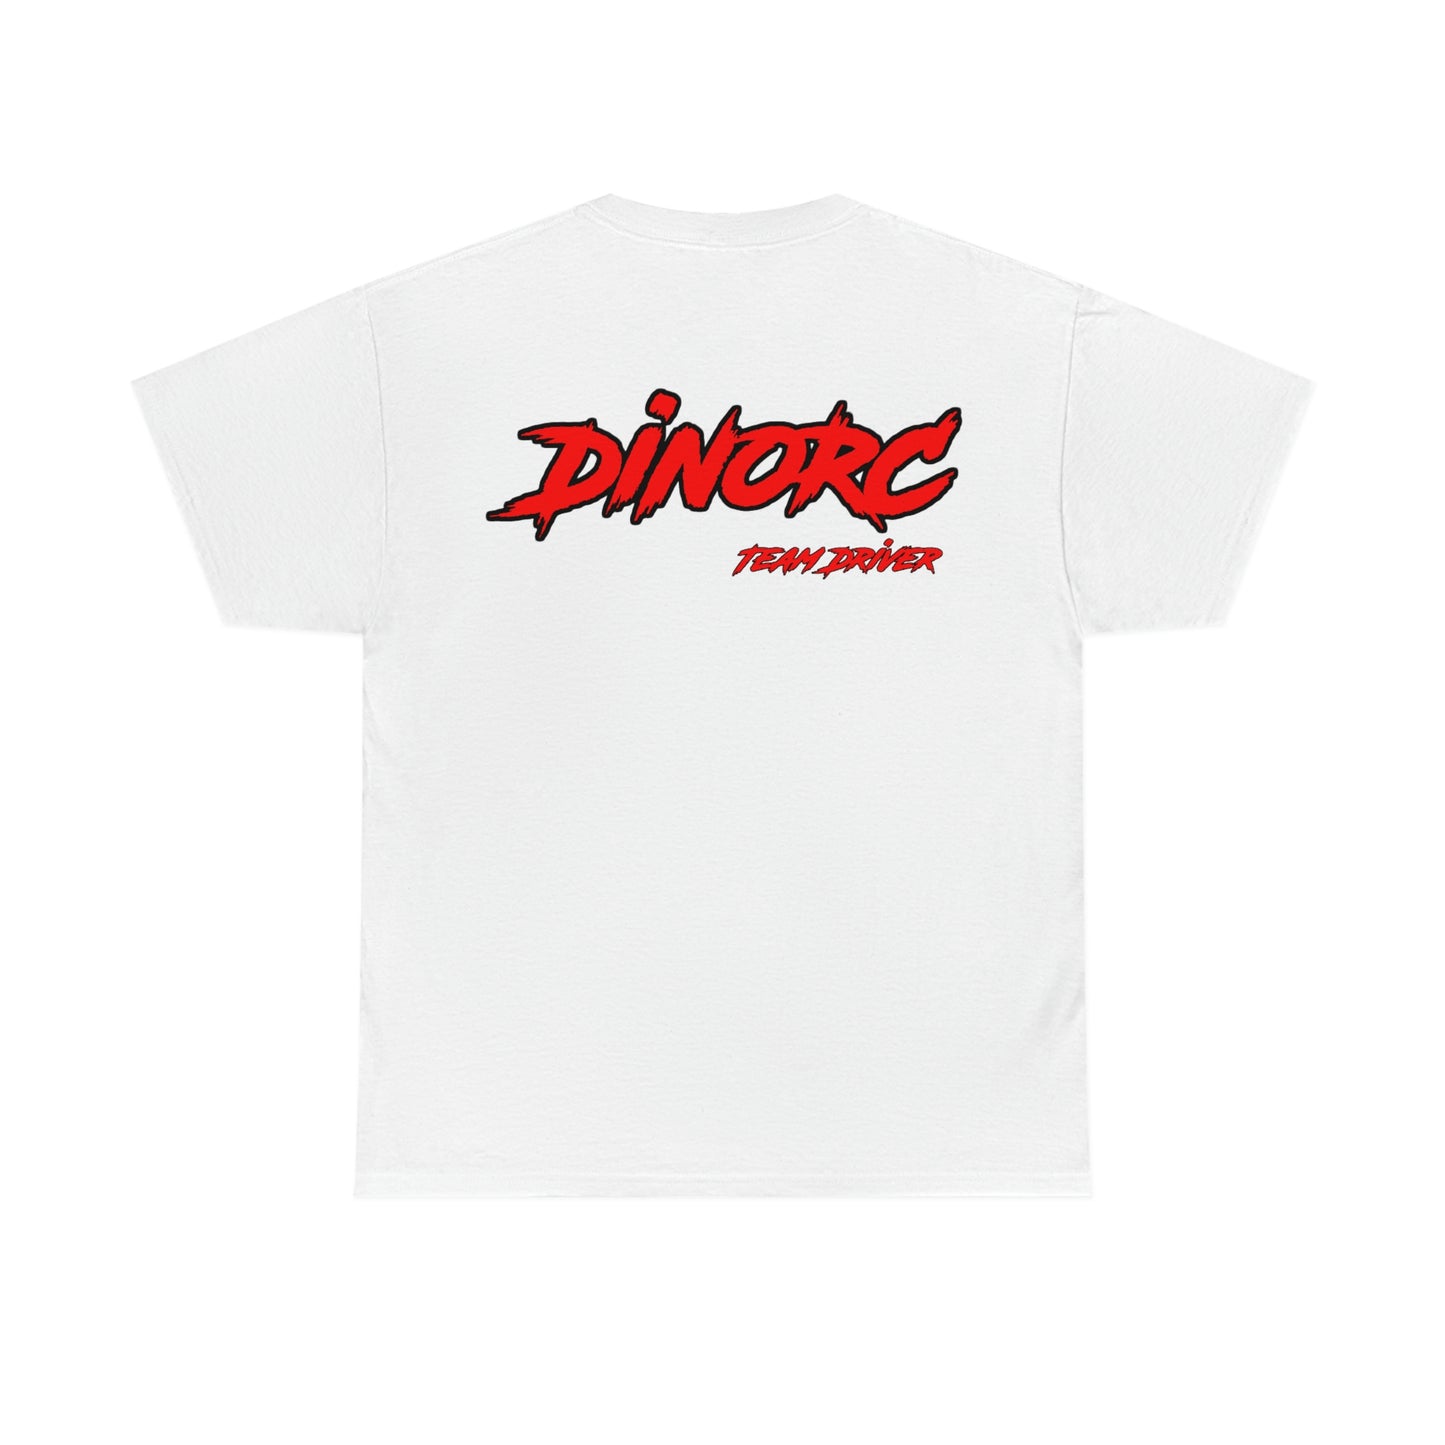 Team Driver DinoRC Logo front and back T-Shirt S-5x 5 colors